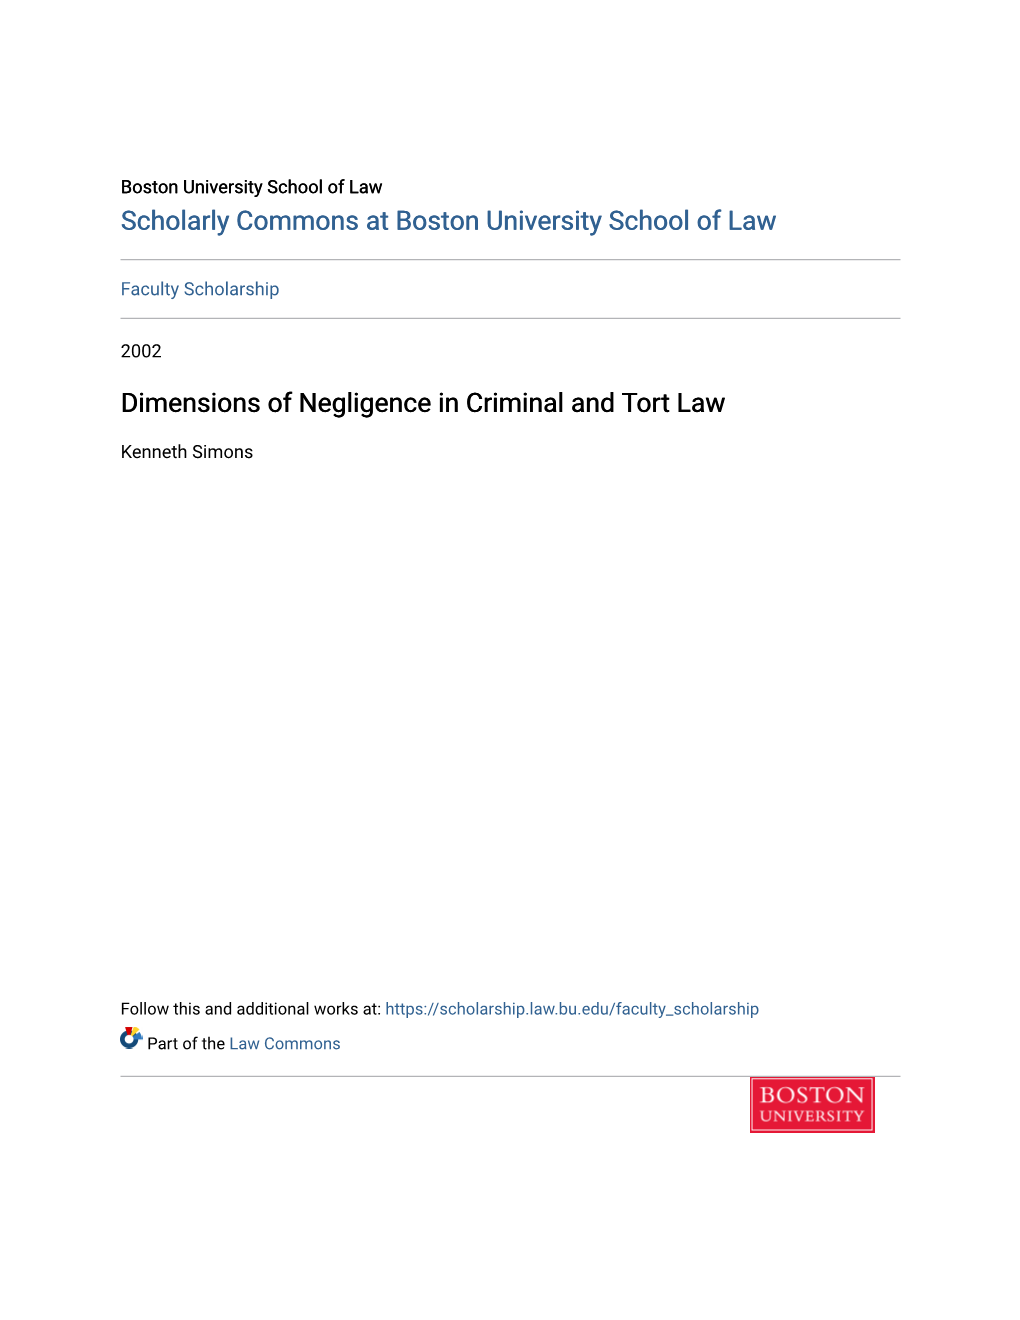 Dimensions of Negligence in Criminal and Tort Law